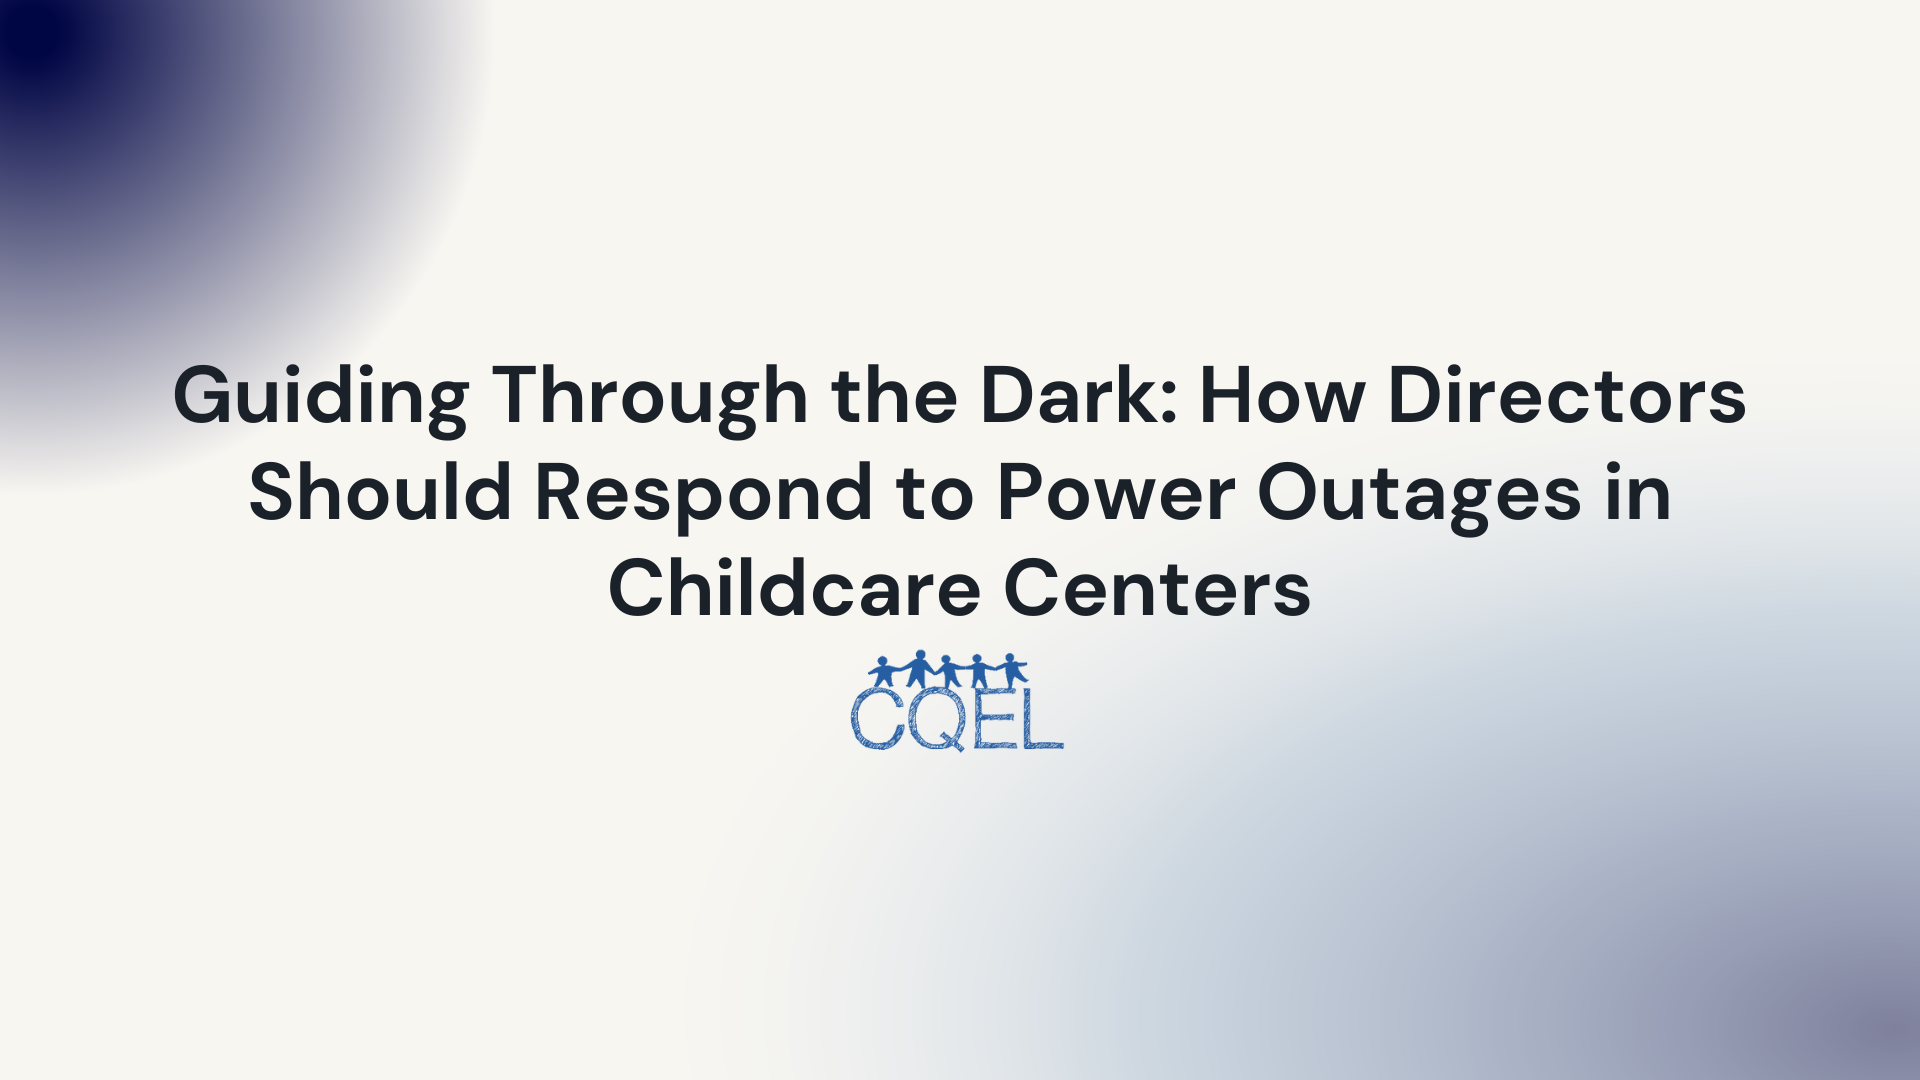 Guiding Through the Dark: How Directors Should Respond to Power Outages in Childcare Centers